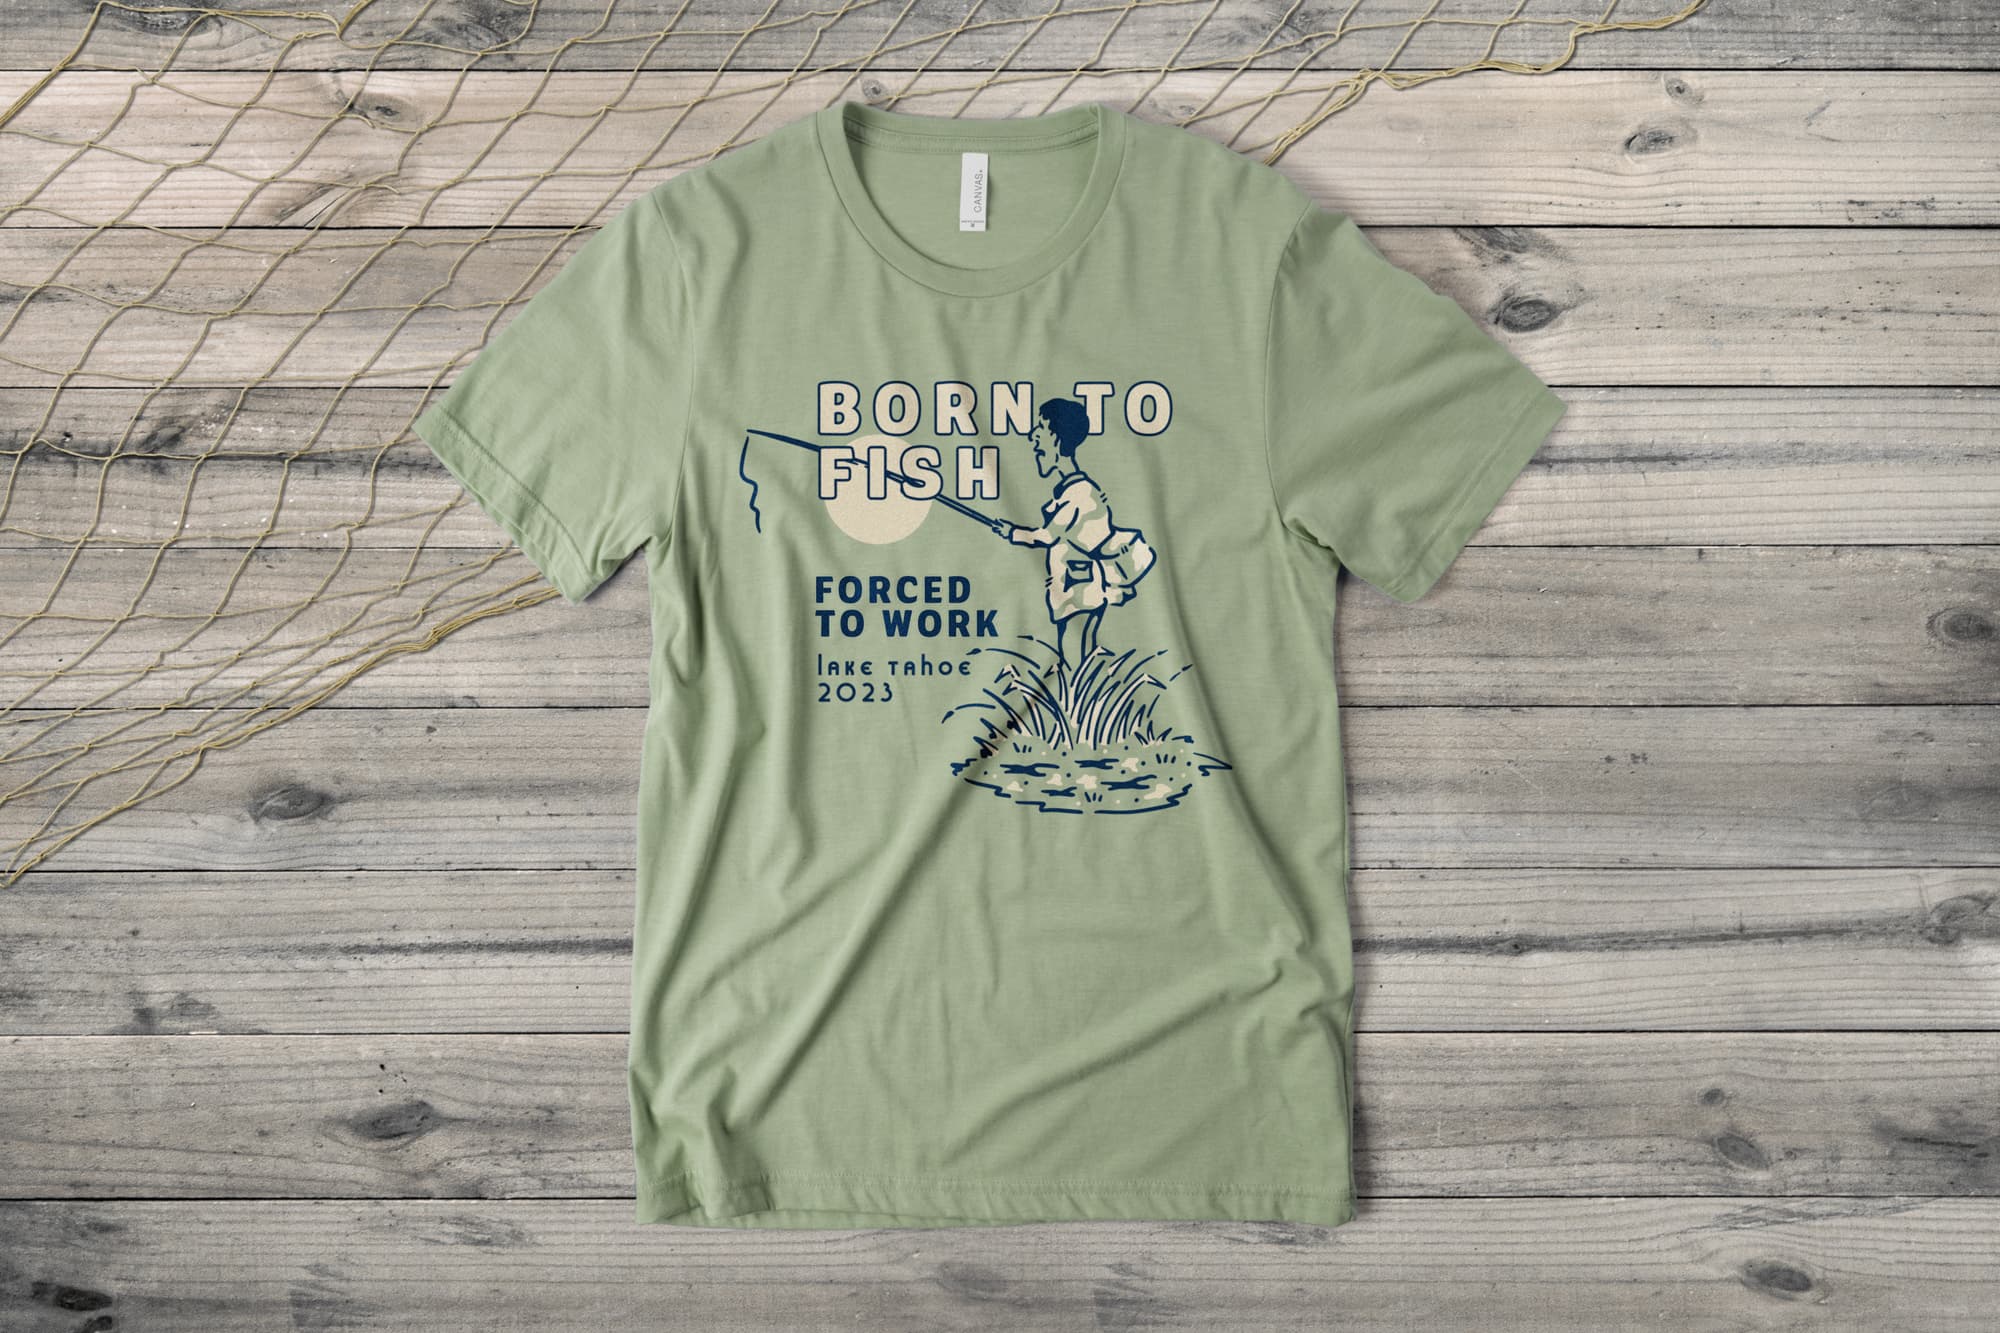 Custom t-shirt with a fishing themed template on the shirt. It says "Born to Fish, Forced to work. Lake Tahoe, 2023"